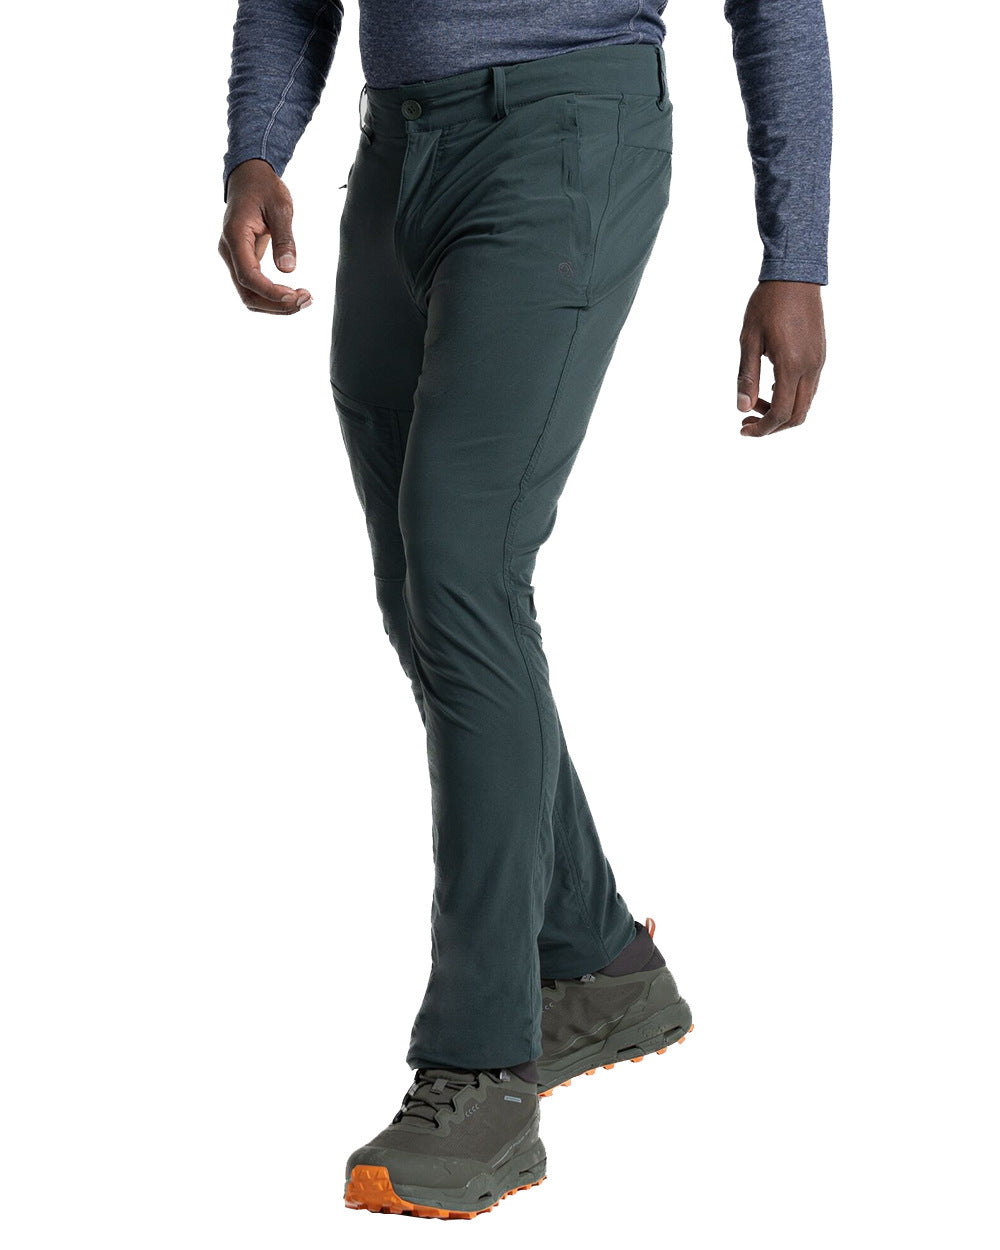 Spruce Green Coloured Craghoppers Mens NosiLife Pro Active Trousers On A White Background 